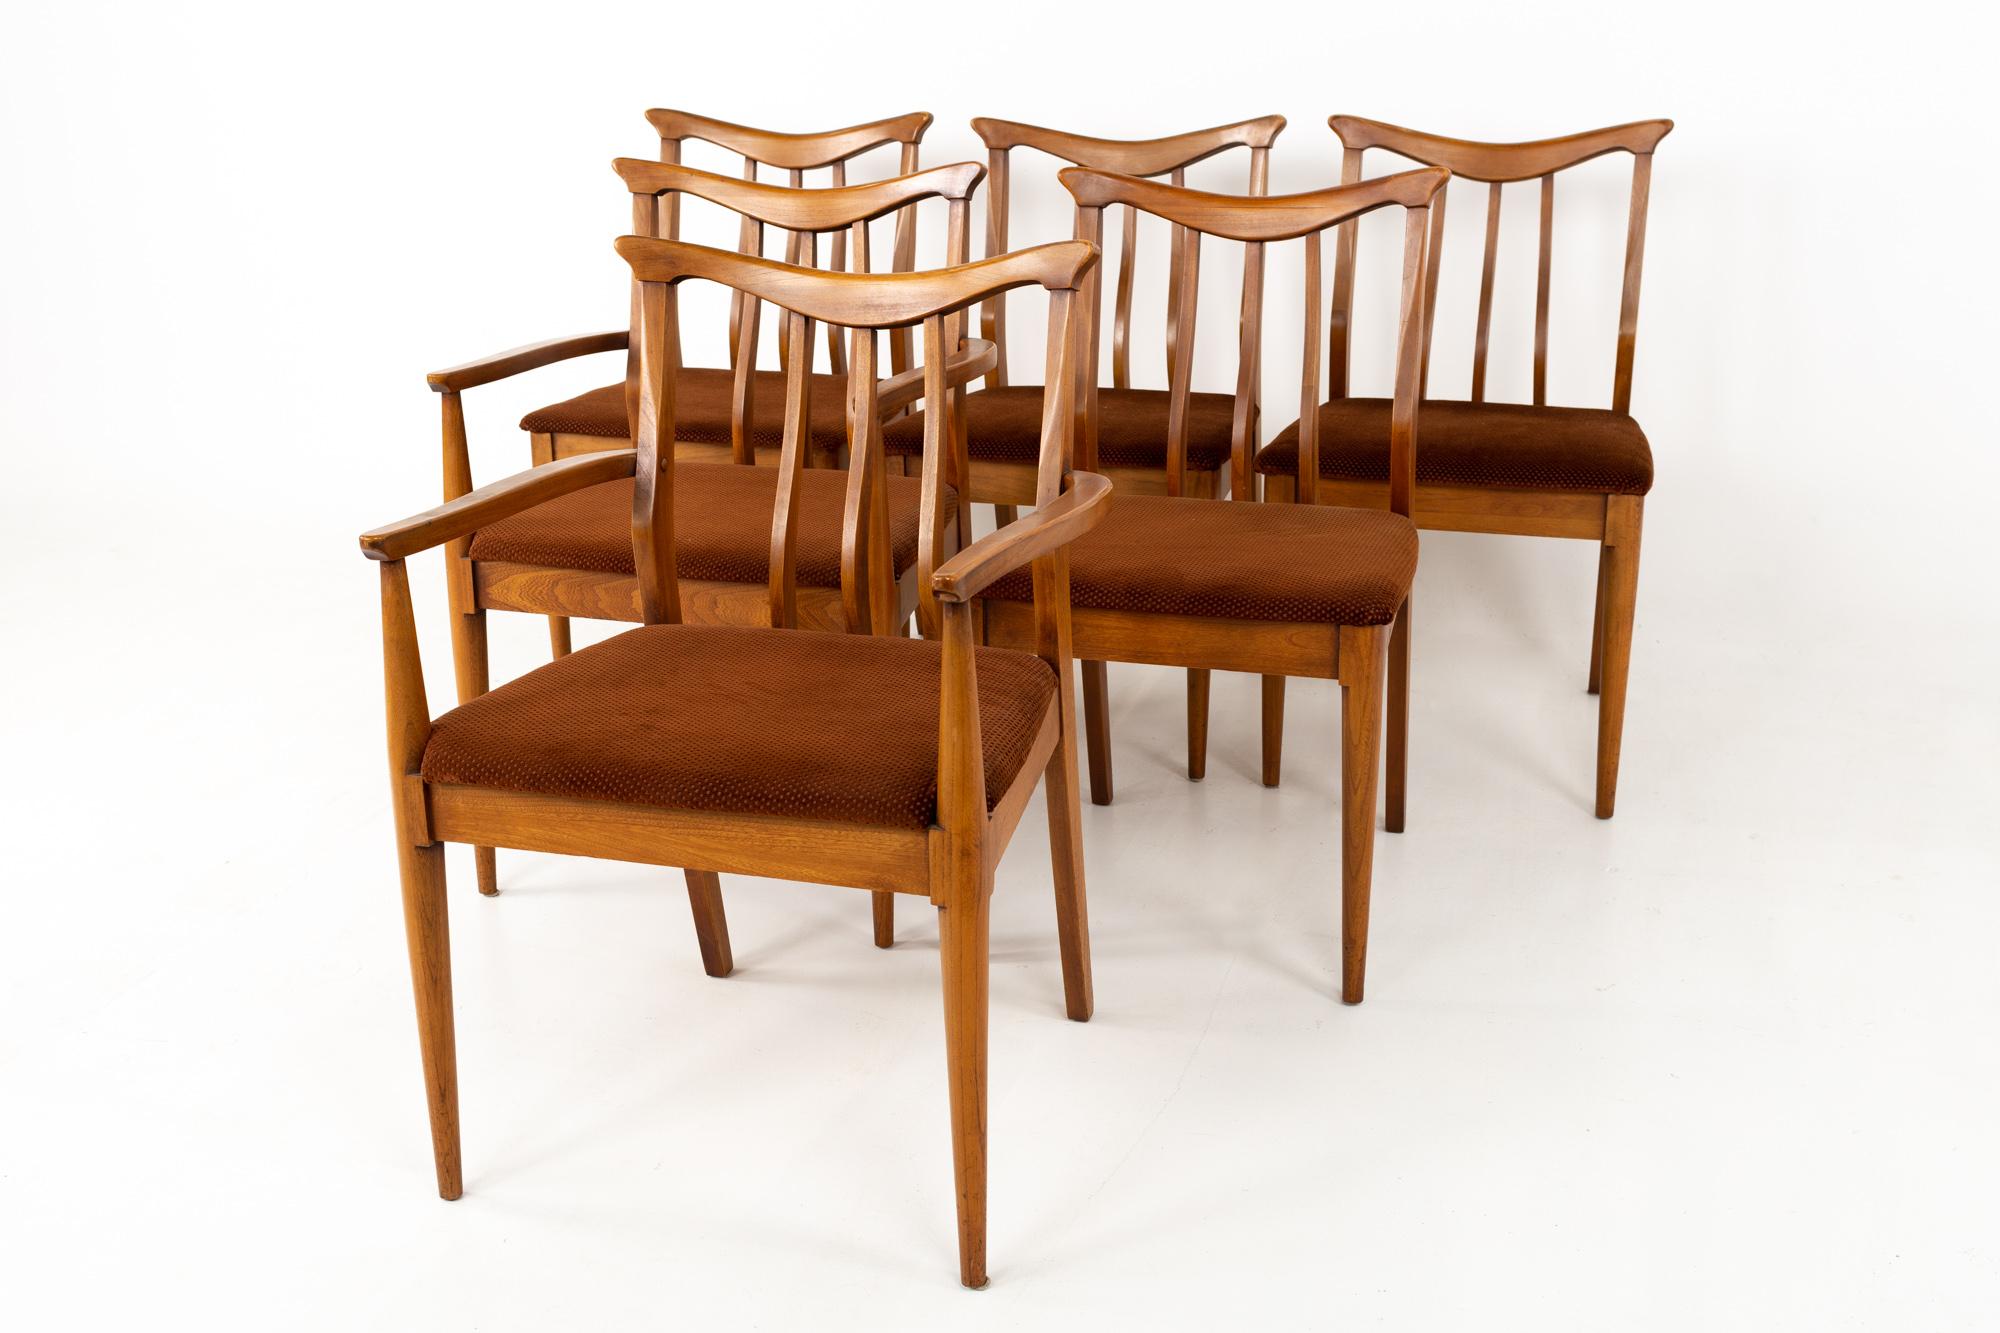 Blowing rock mid century walnut dining chairs - set of 6
These chairs are 23.5 wide x 22.75 deep x 33.5 inches high, with a seat height of 18.5 inches 

All pieces of furniture can be had in what we call restored vintage condition. That means the